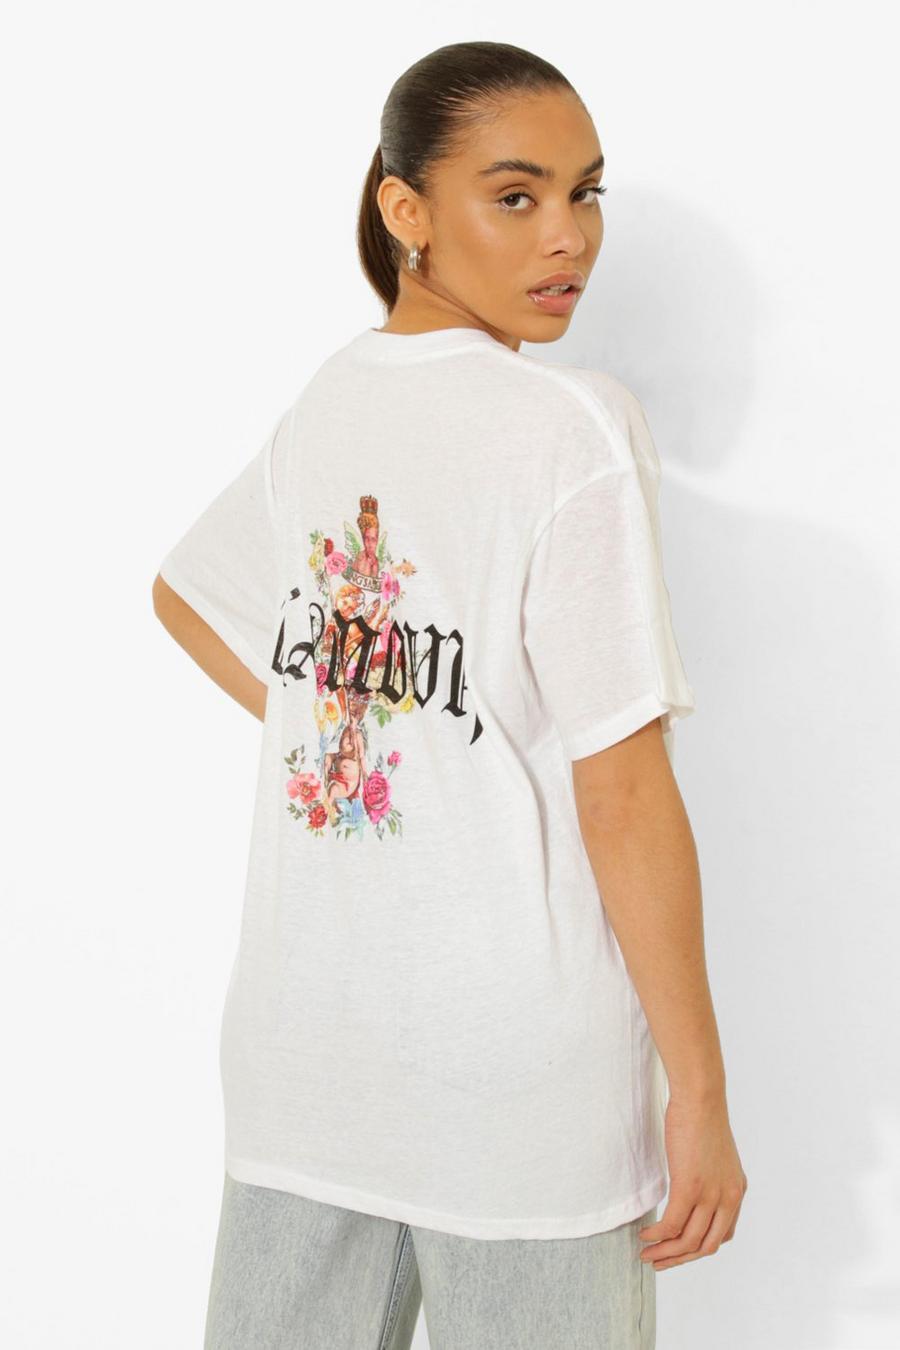 White L'Amour Cherub Floral Graphic T-Shirt image number 1